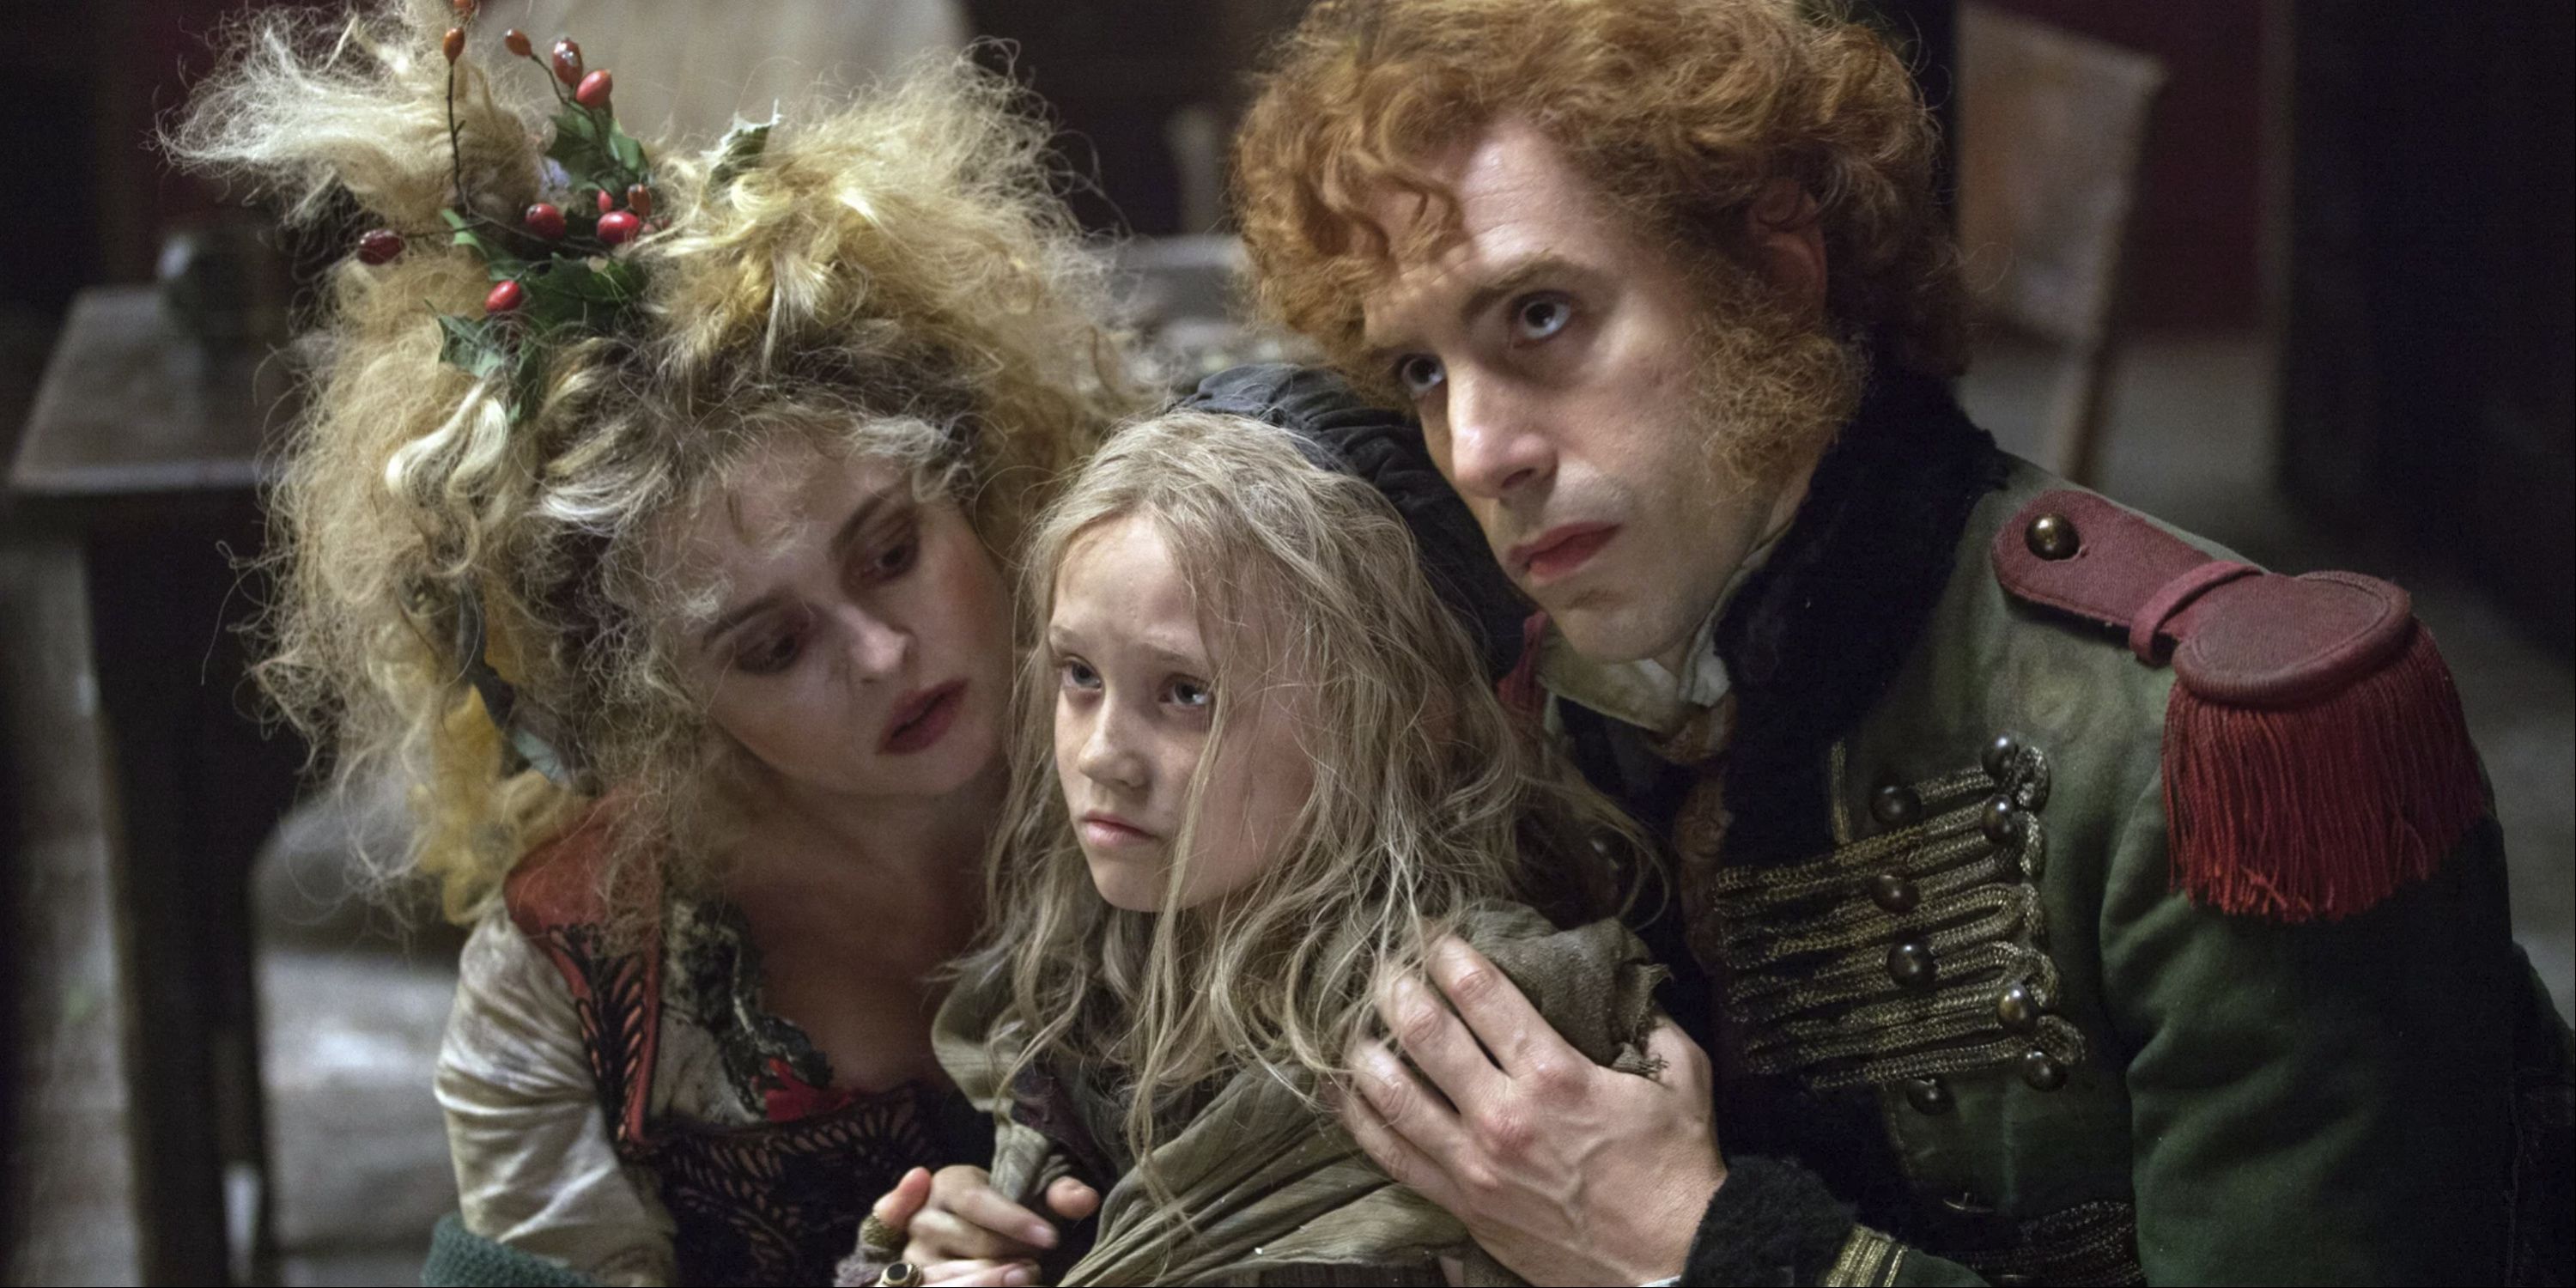 The Thenardiers, played by Helena Bonham Carter and Sacha Baron Cohen, put their hands on a scared Cosette in Les Miserables.